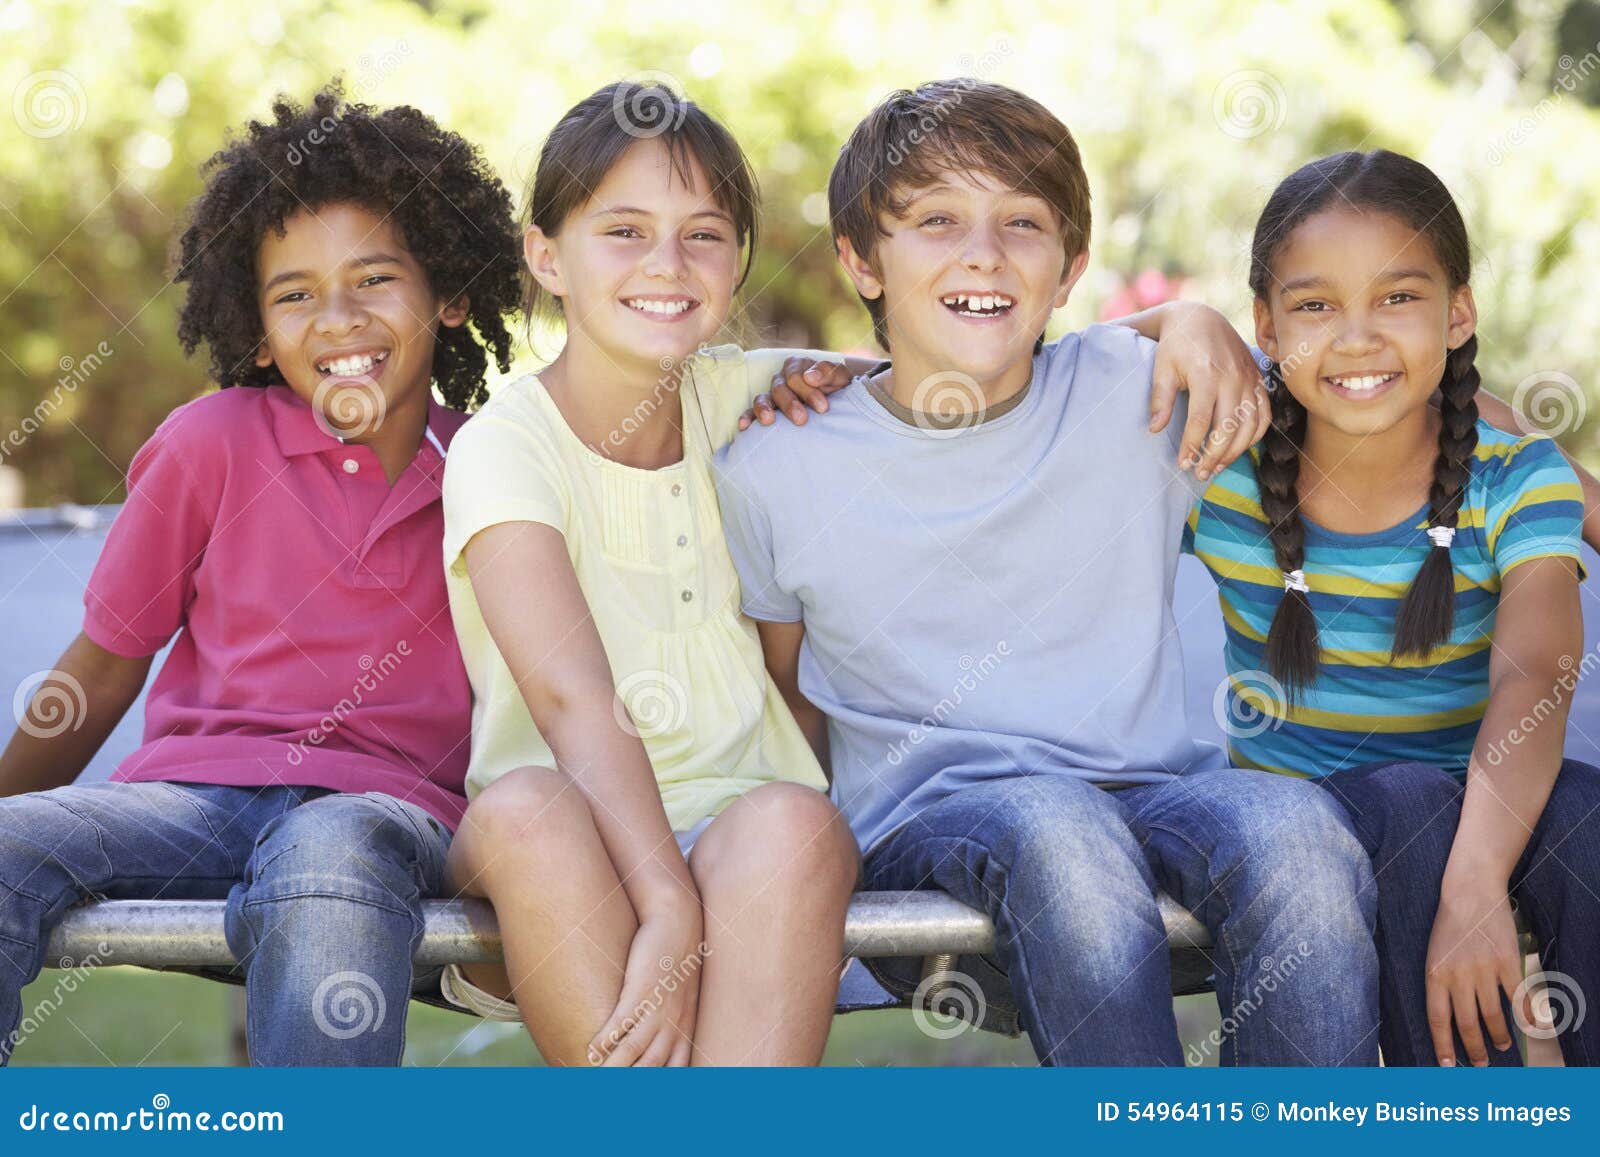 Group of Children Sitting on Edge of Trampoline Together Stock Image ...